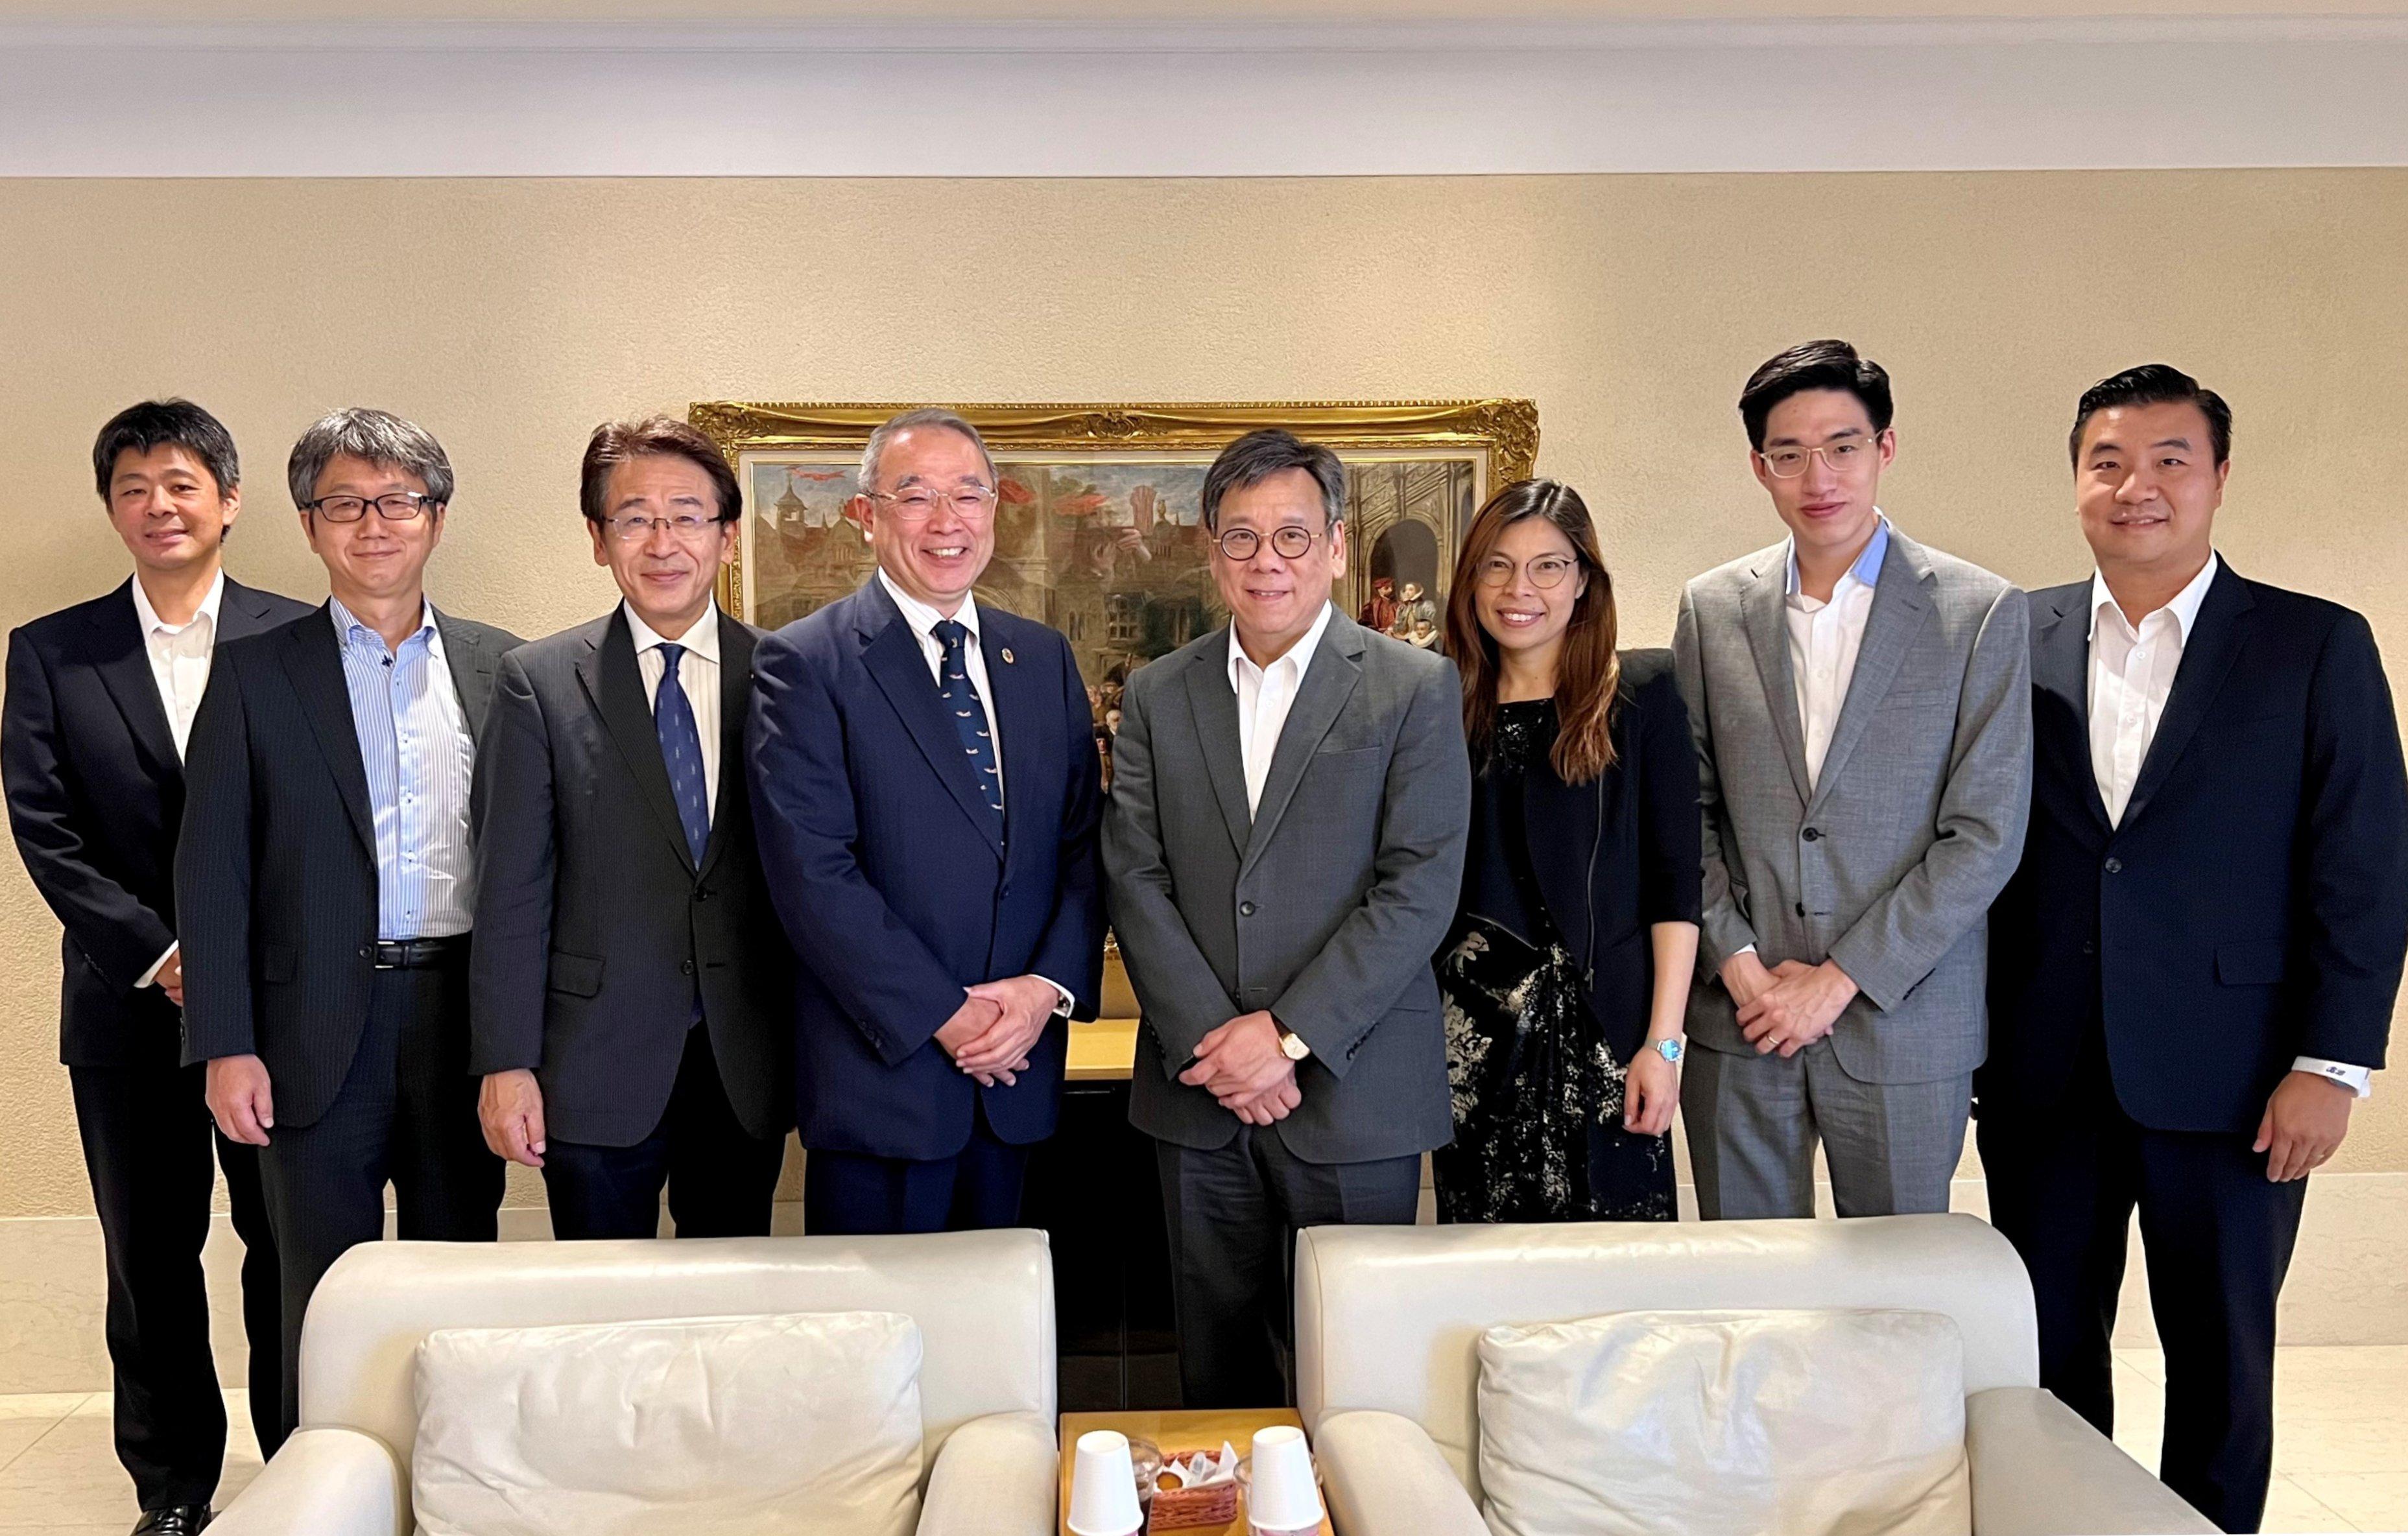 The Secretary for Commerce and Economic Development, Mr Algernon Yau (fourth right), visits NEC Corporation (NEC), a renowned multinational information technology and electronics company, in Tokyo, Japan, today (June 20) and meets with the Executive Advisor of NEC and Vice Chair of Keidanren (Japan Business Federation), Dr Nobuhiro Endo (fourth left), to exchange views on enhancing business co-operation between Hong Kong and Japan. The Principal Hong Kong Economic and Trade Representative (Tokyo), Miss Winsome Au (third right), also attends the meeting.